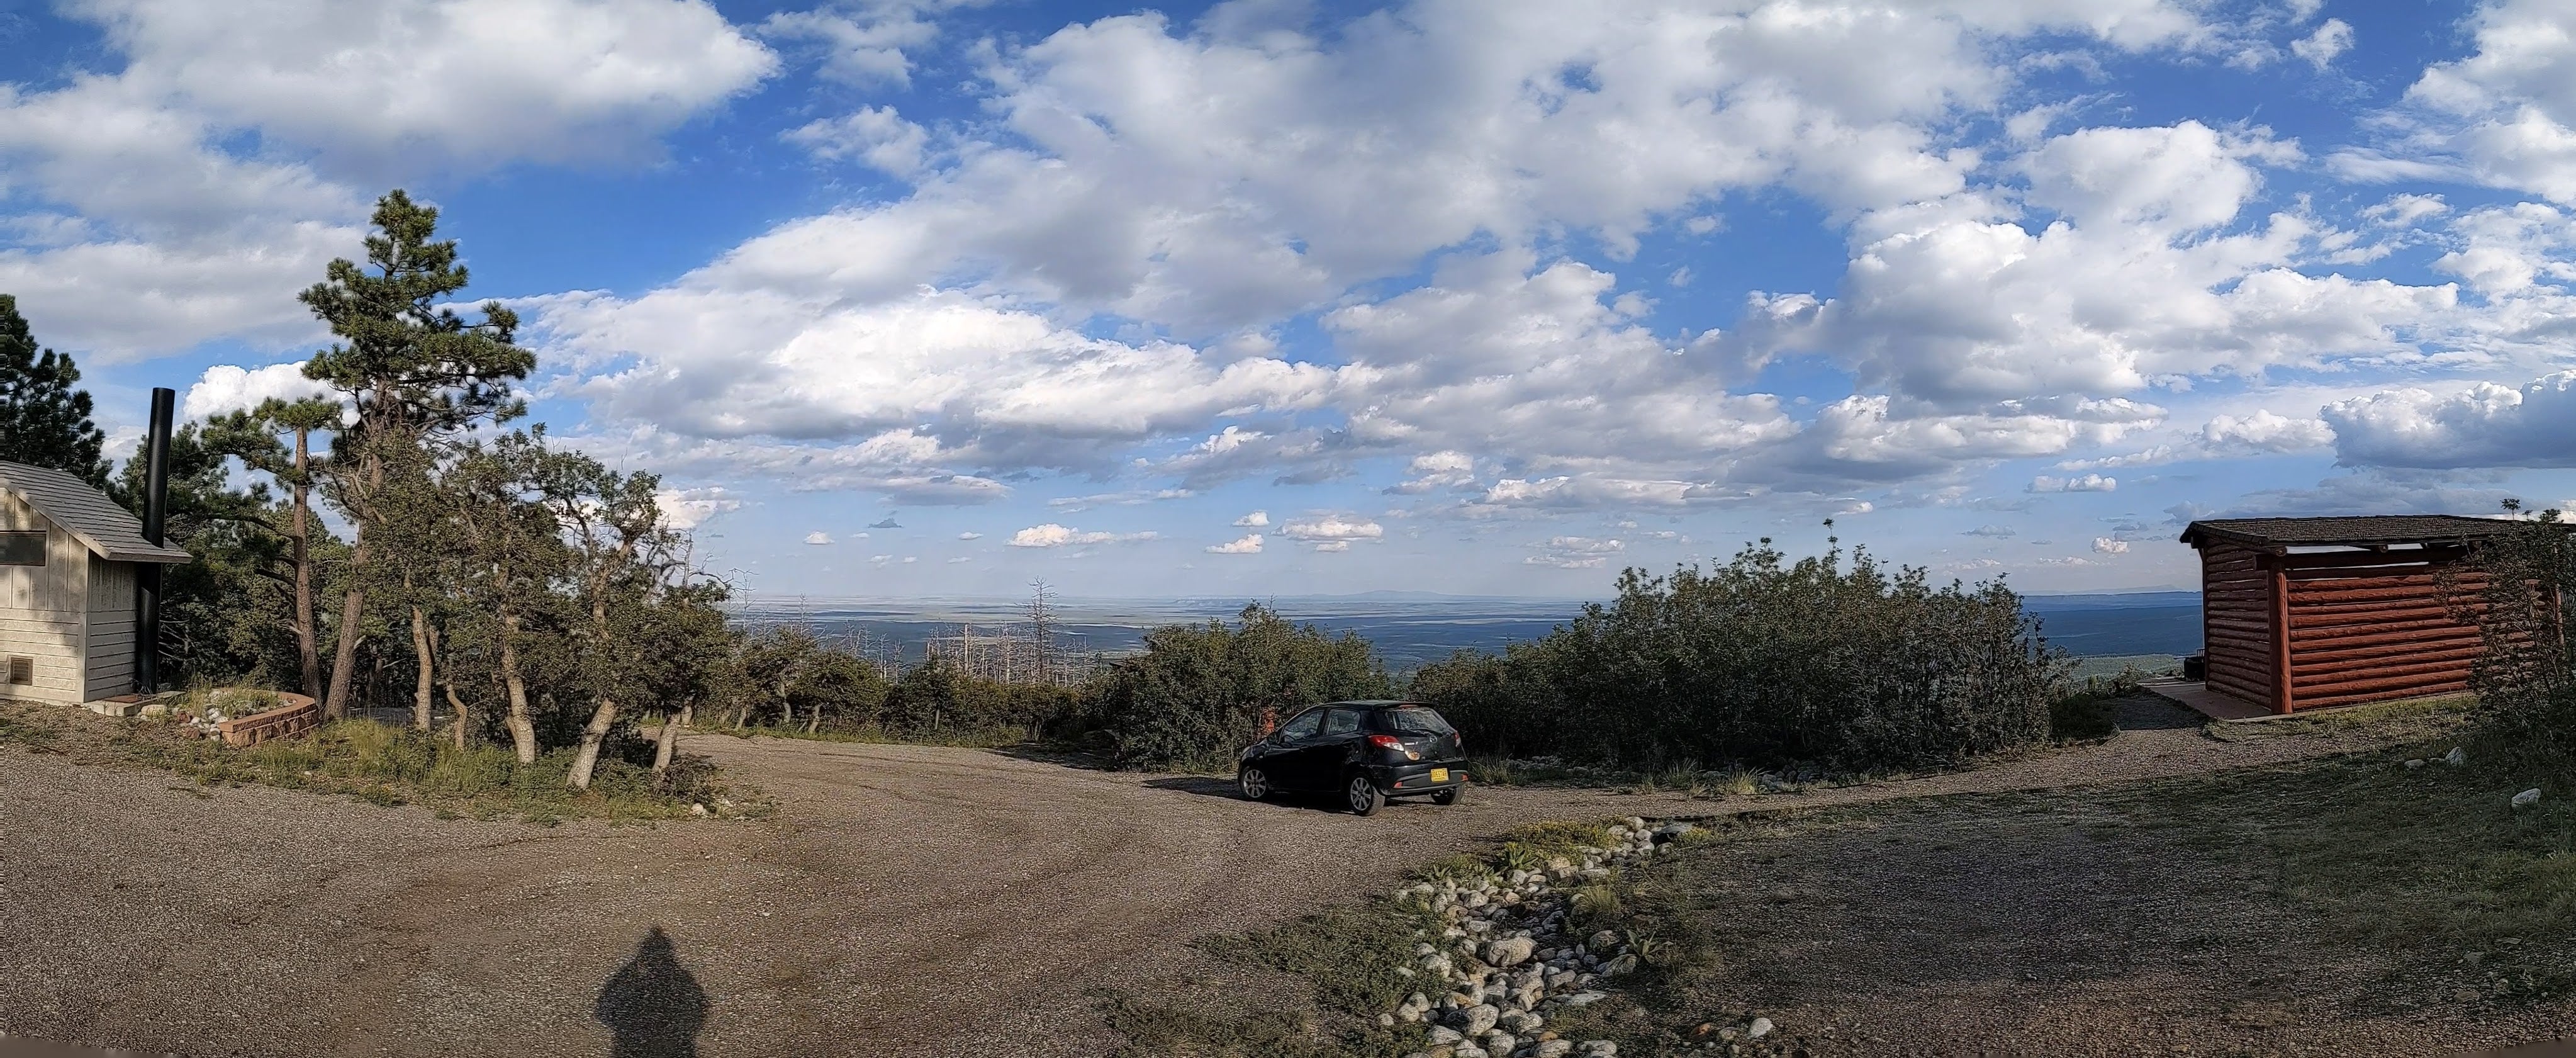 Camper submitted image from Capilla Peak Campground - 2